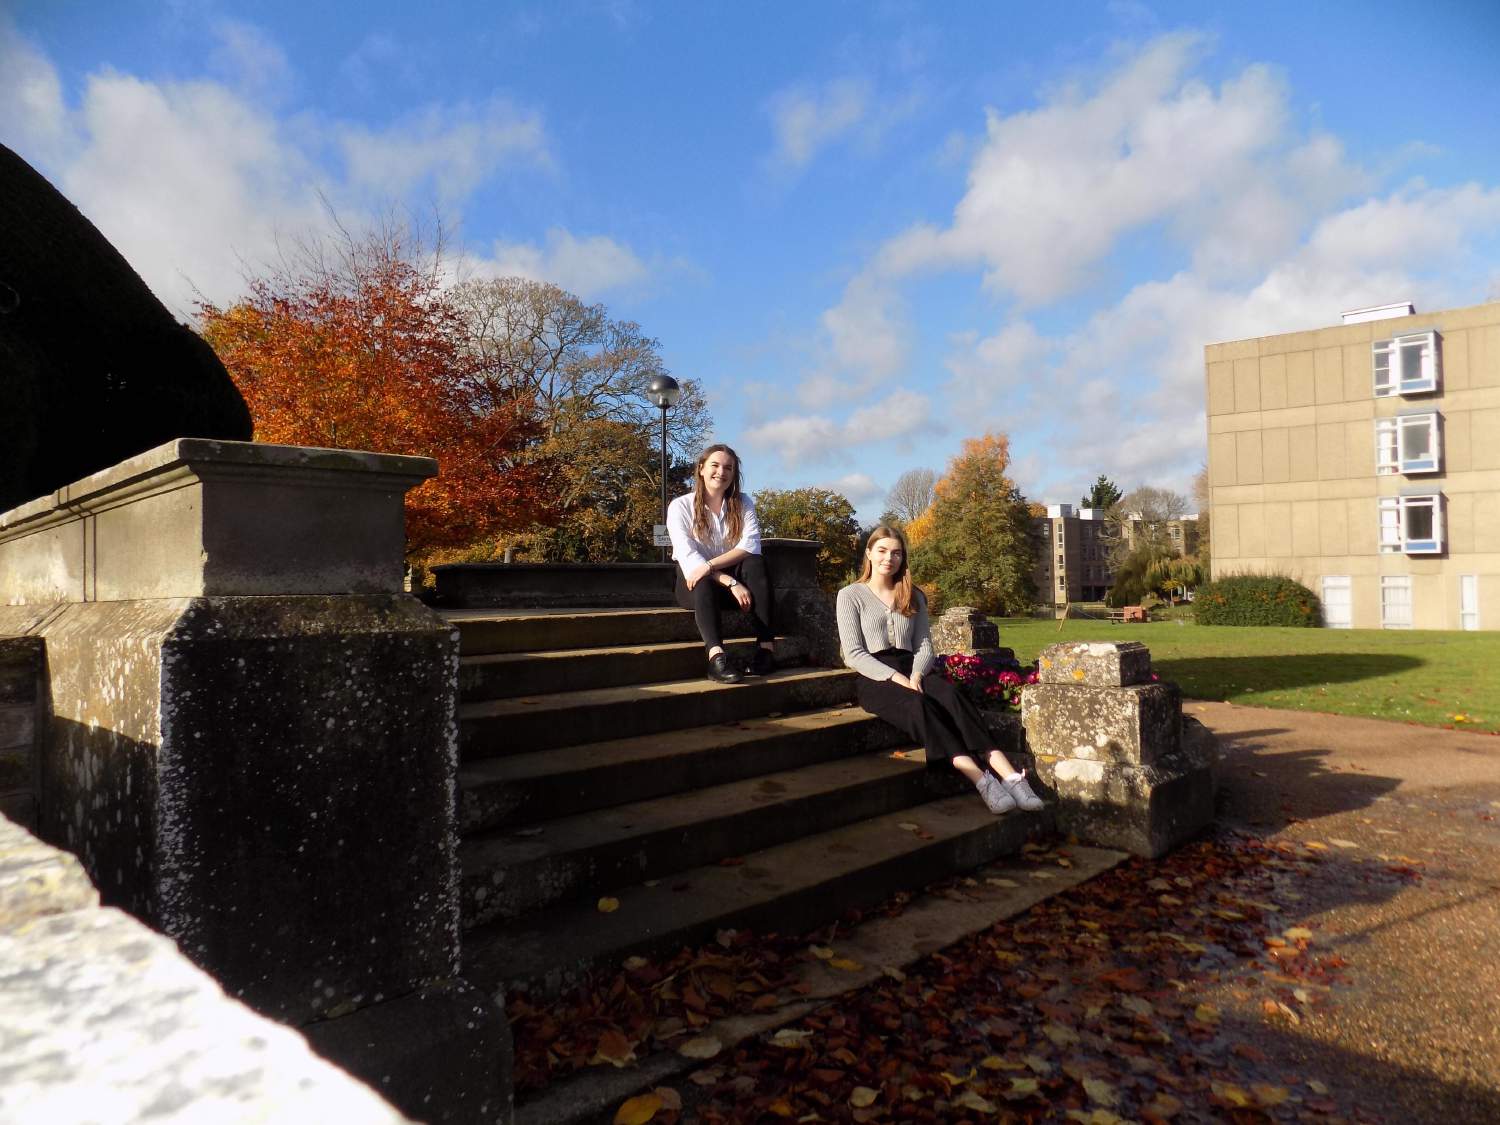 Nouse interviews The Last Taboo founders on their University of York report